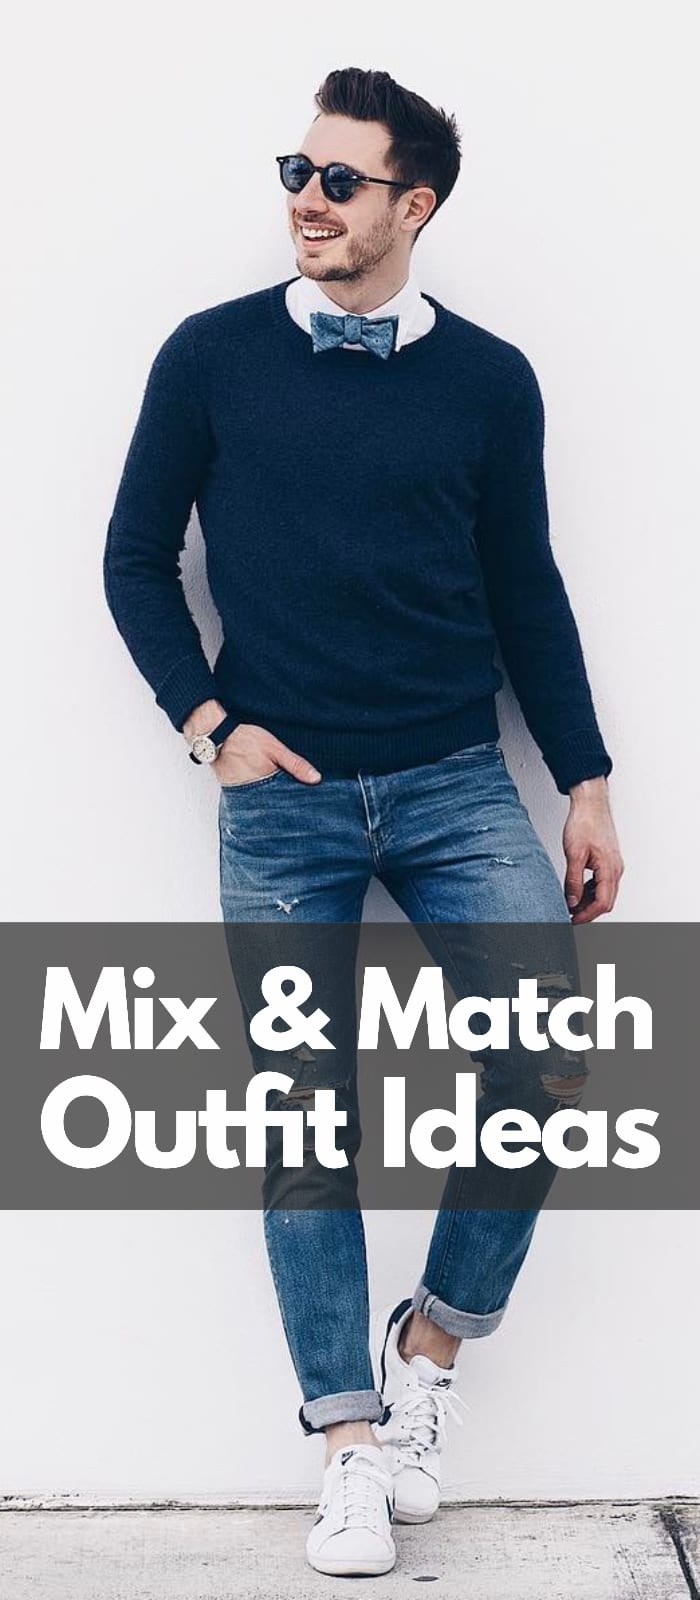 mix & match outfit ideas for men